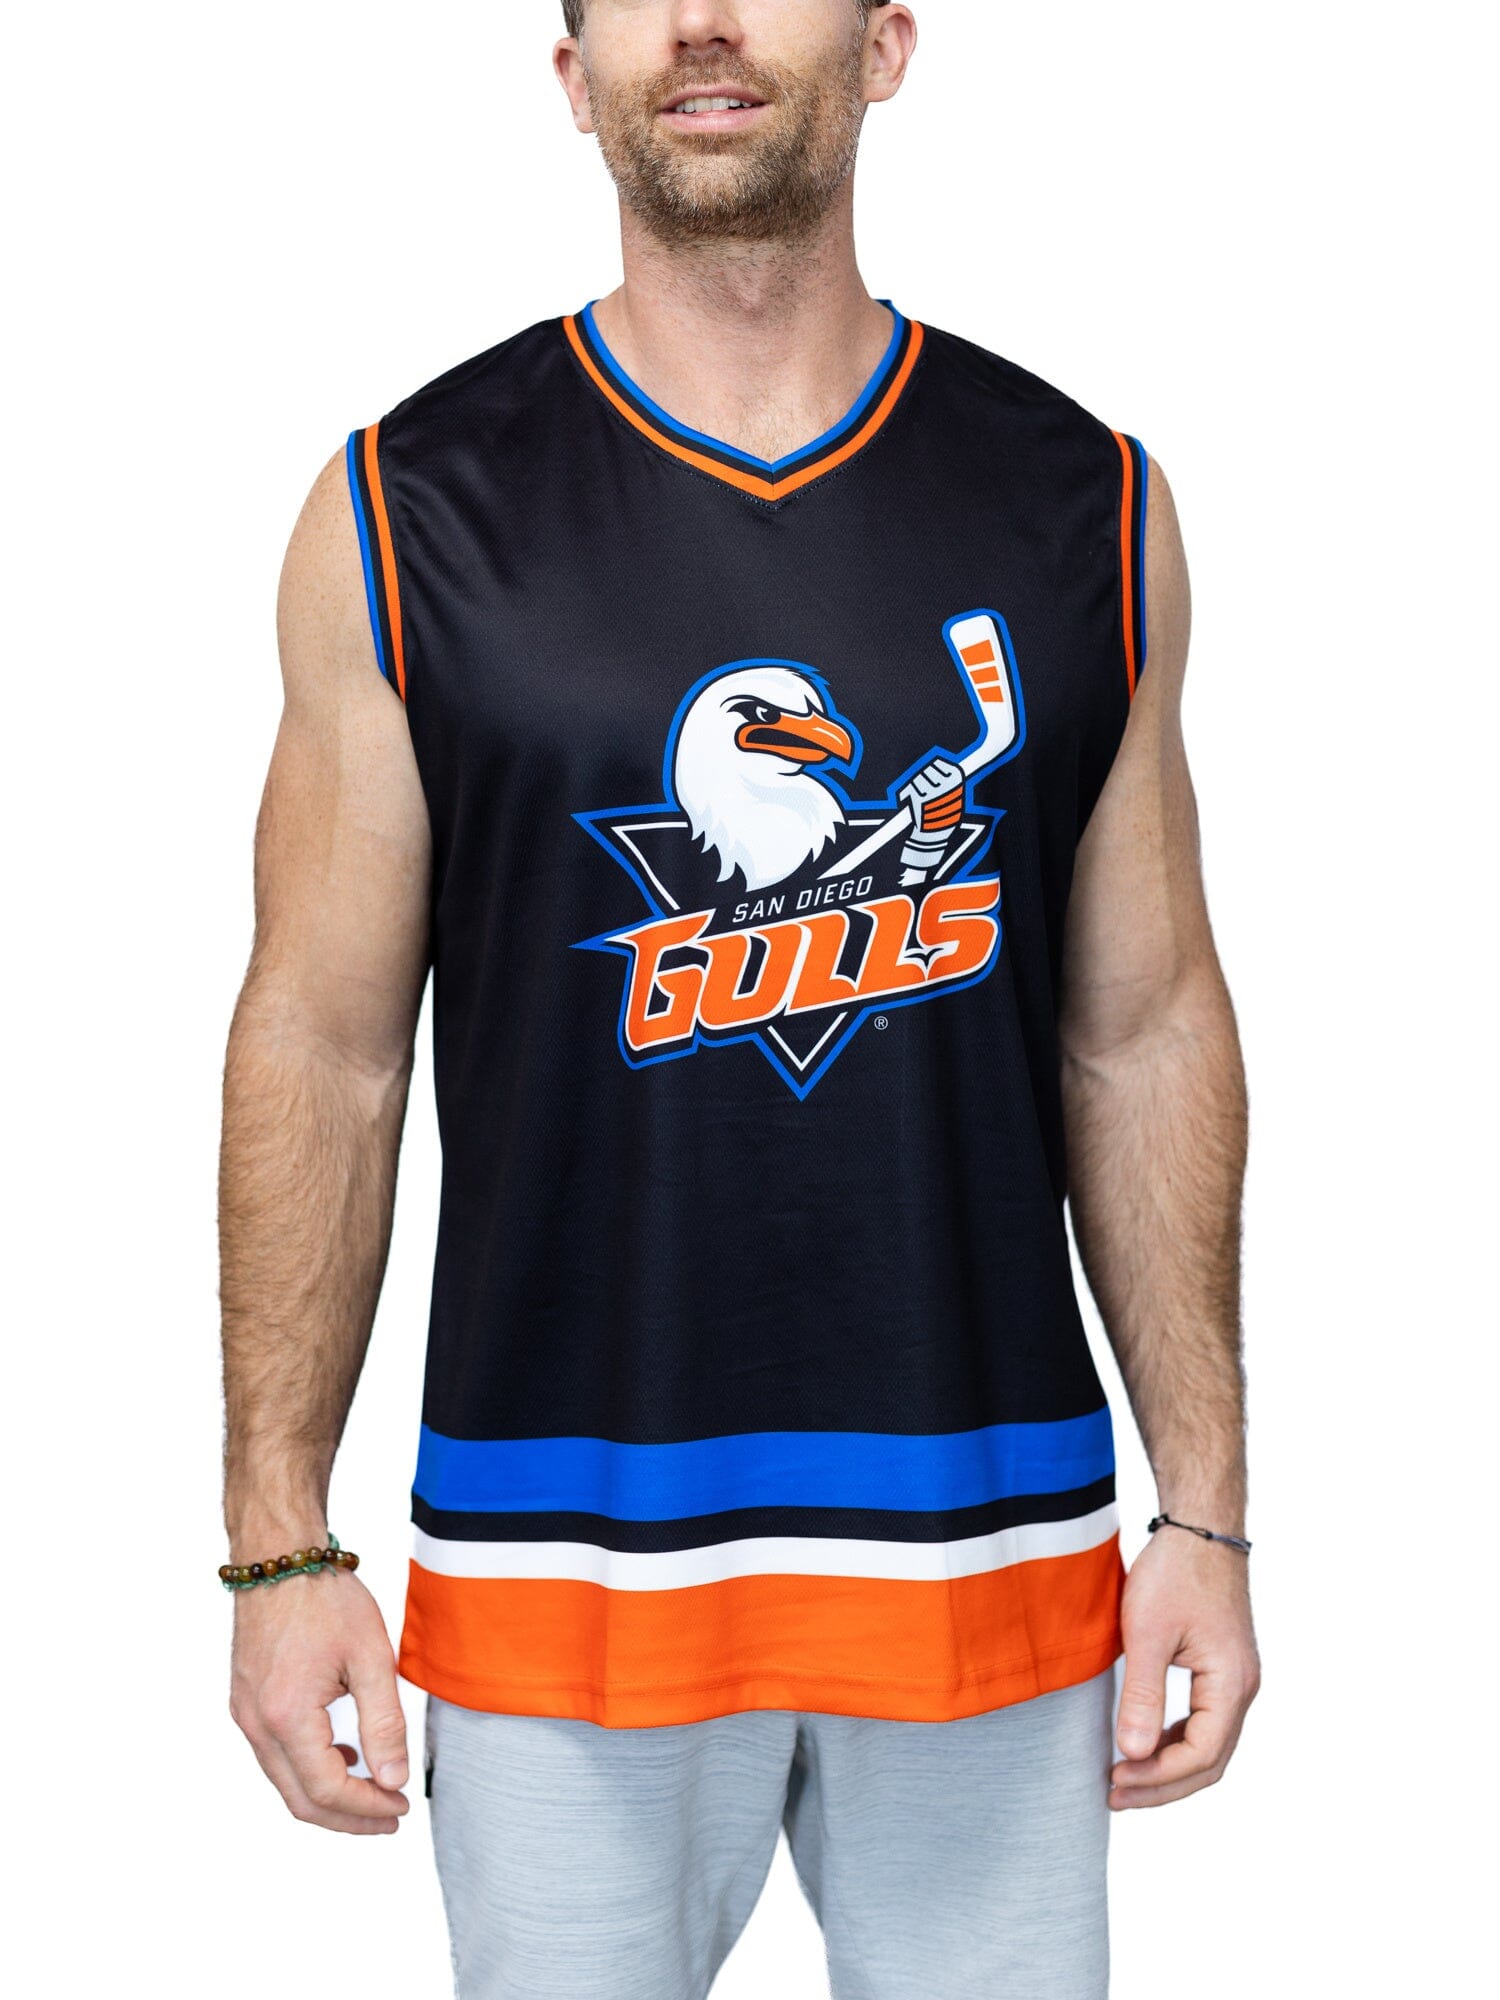 San Diego Gulls - Looking back at some of our special jerseys this